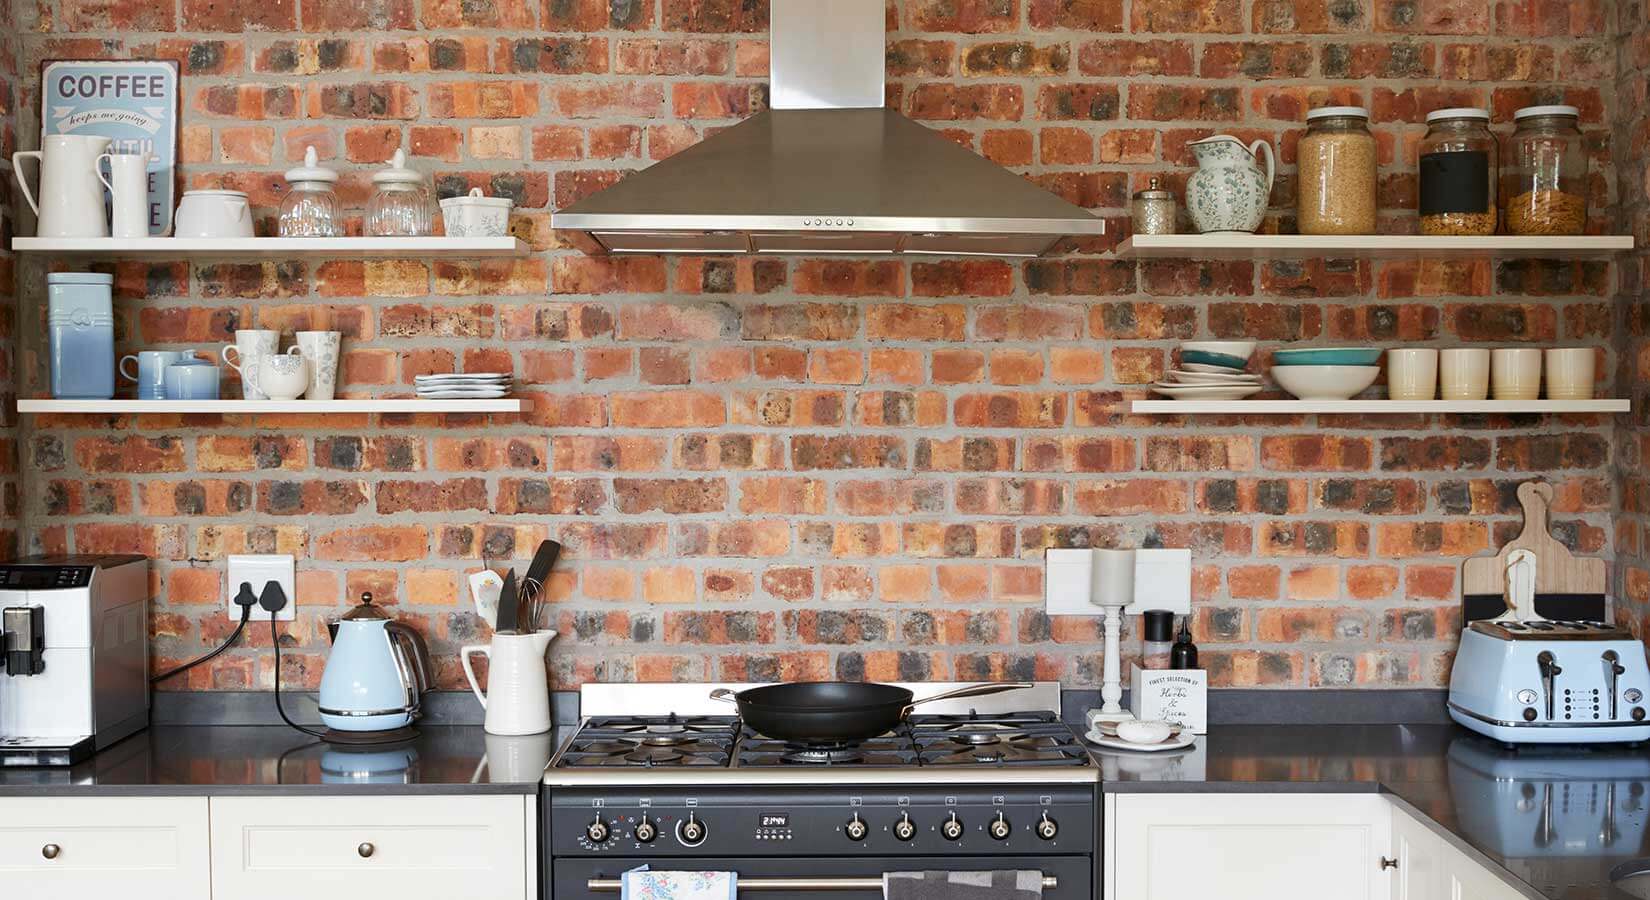 Brick kitchen wall with stove top and range in center and two open shelves on each side.